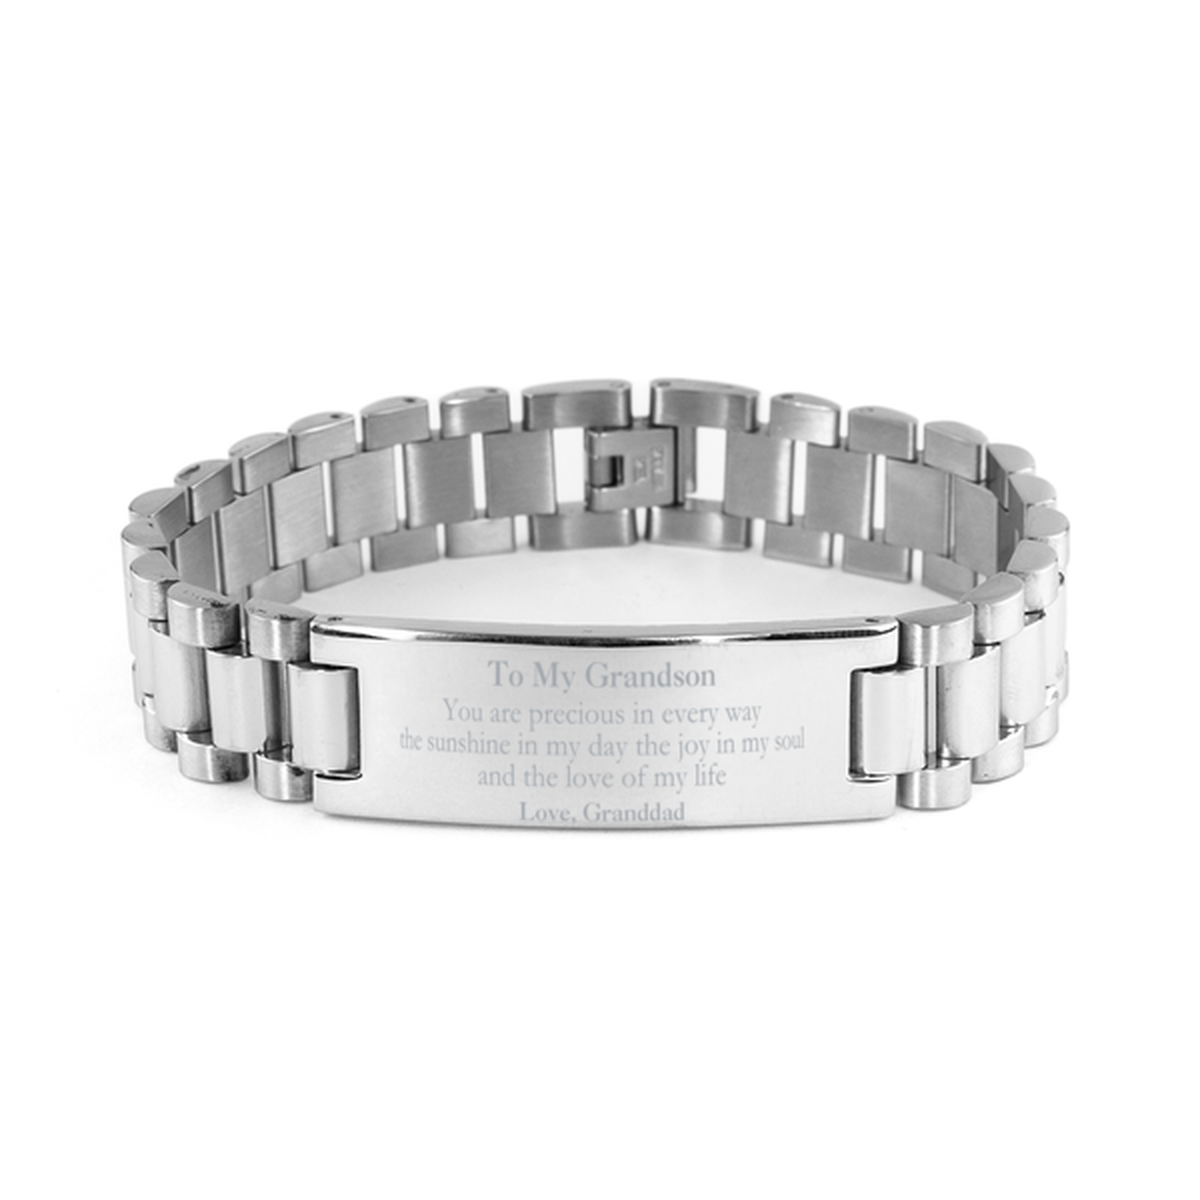 Graduation Gifts for Grandson Ladder Stainless Steel Bracelet Present from Granddad, Christmas Grandson Birthday Gifts Grandson You are precious in every way the sunshine in my day. Love, Granddad